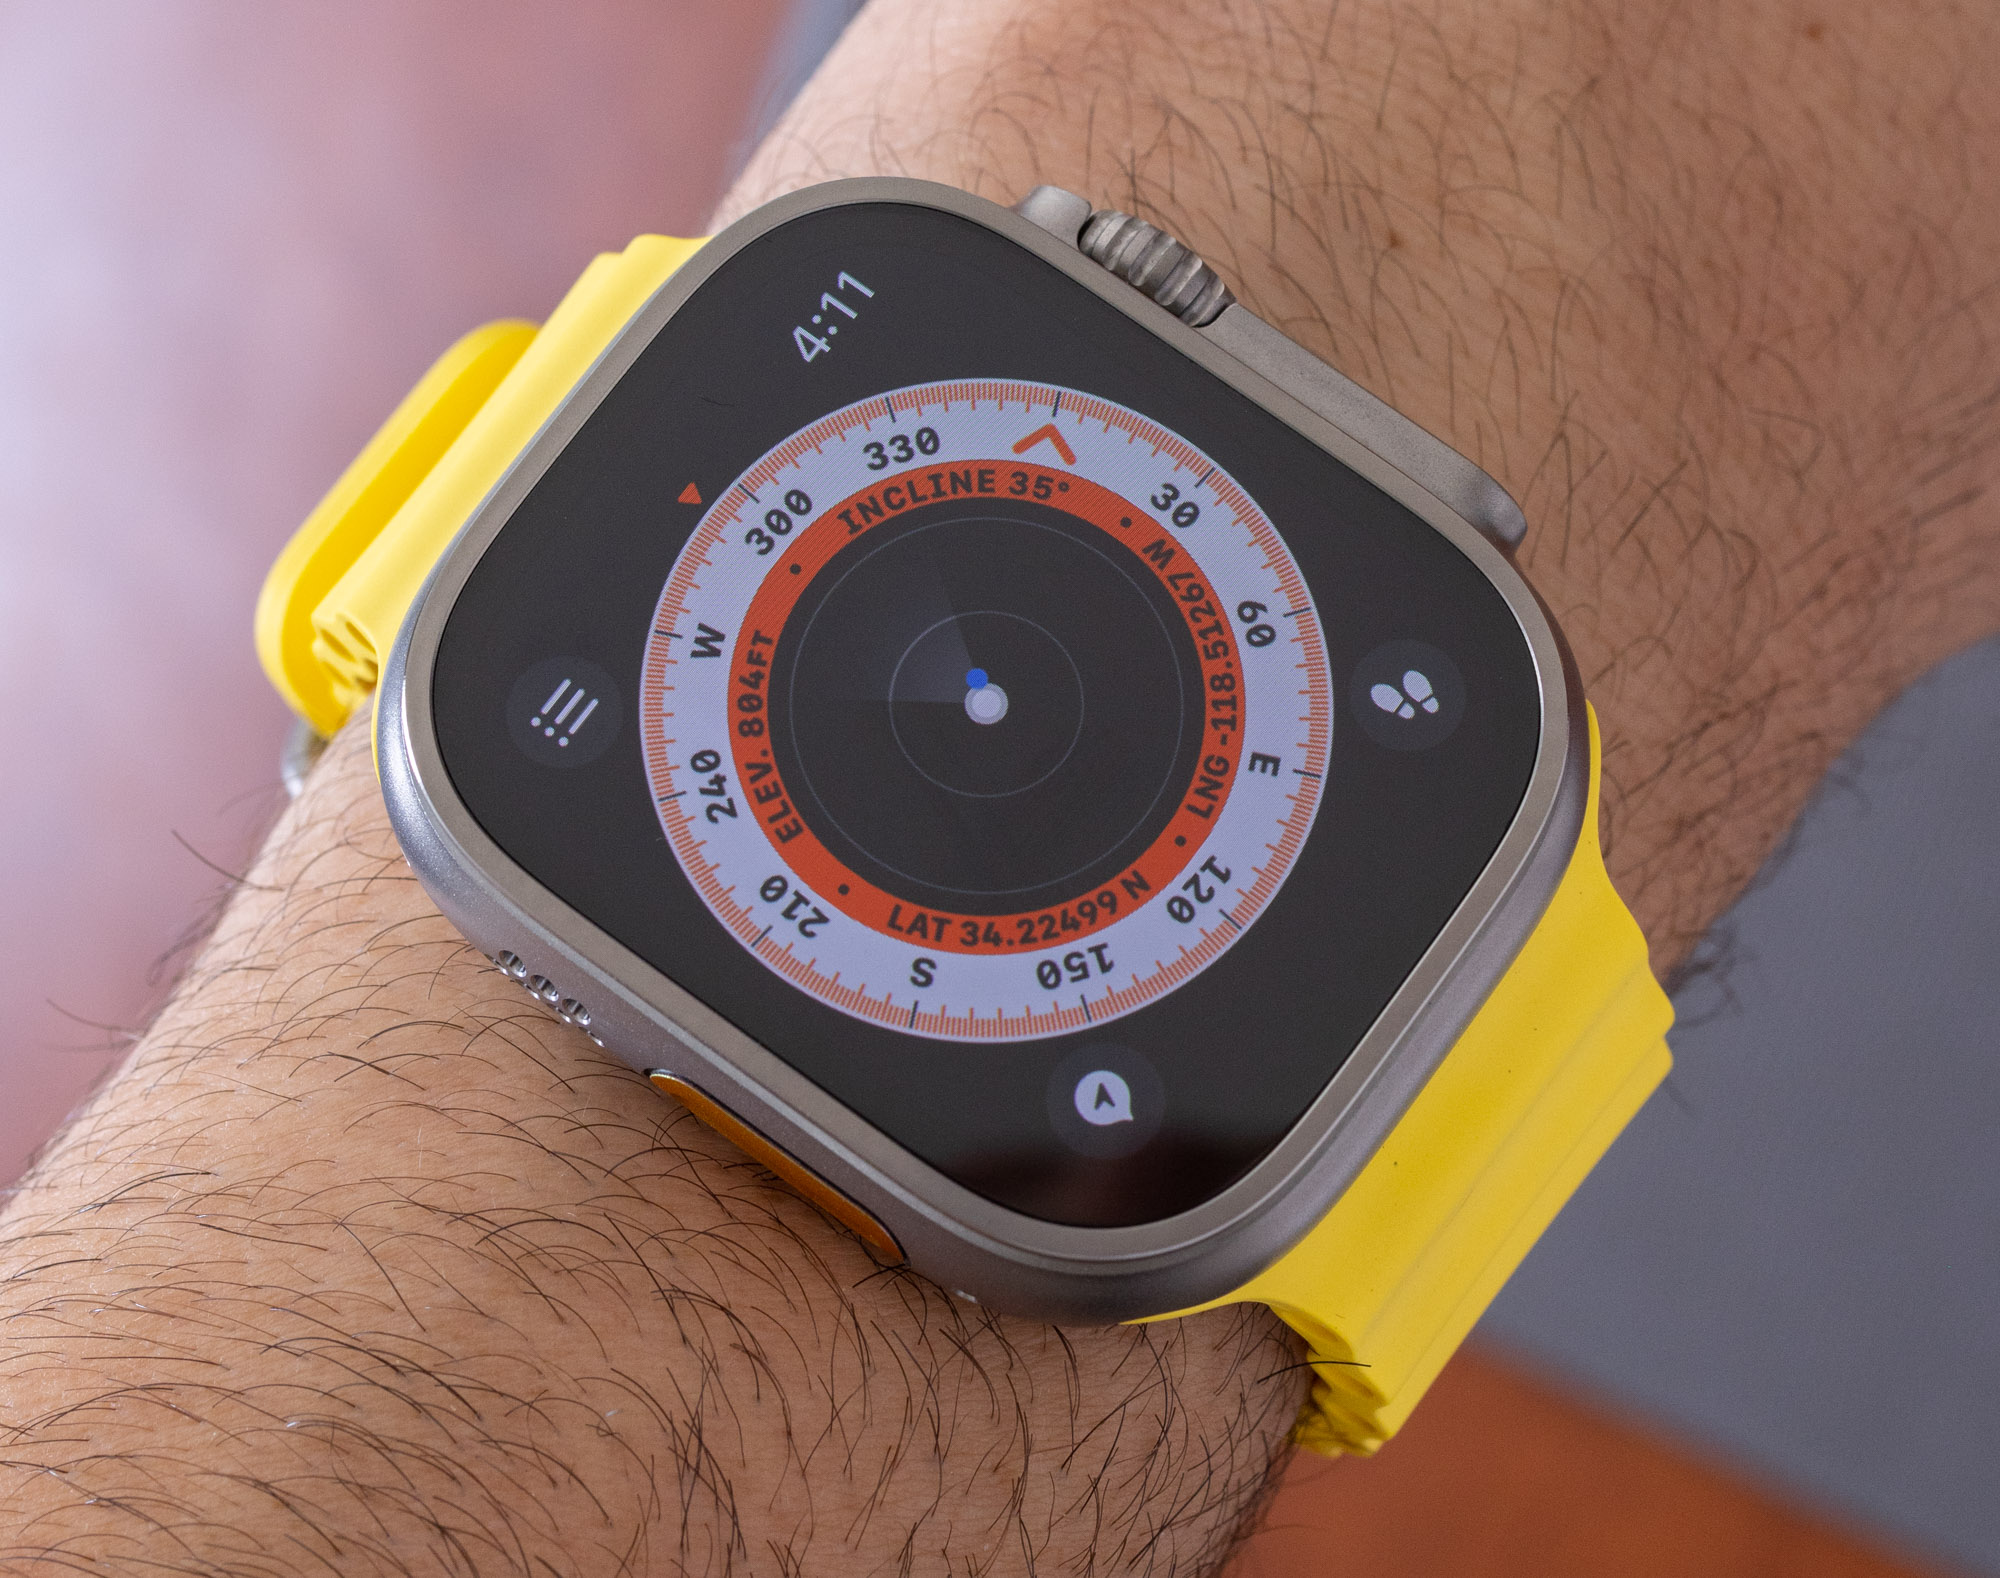 Apple Watch Ultra 2 Test and Review - Best Features of $799 Watch